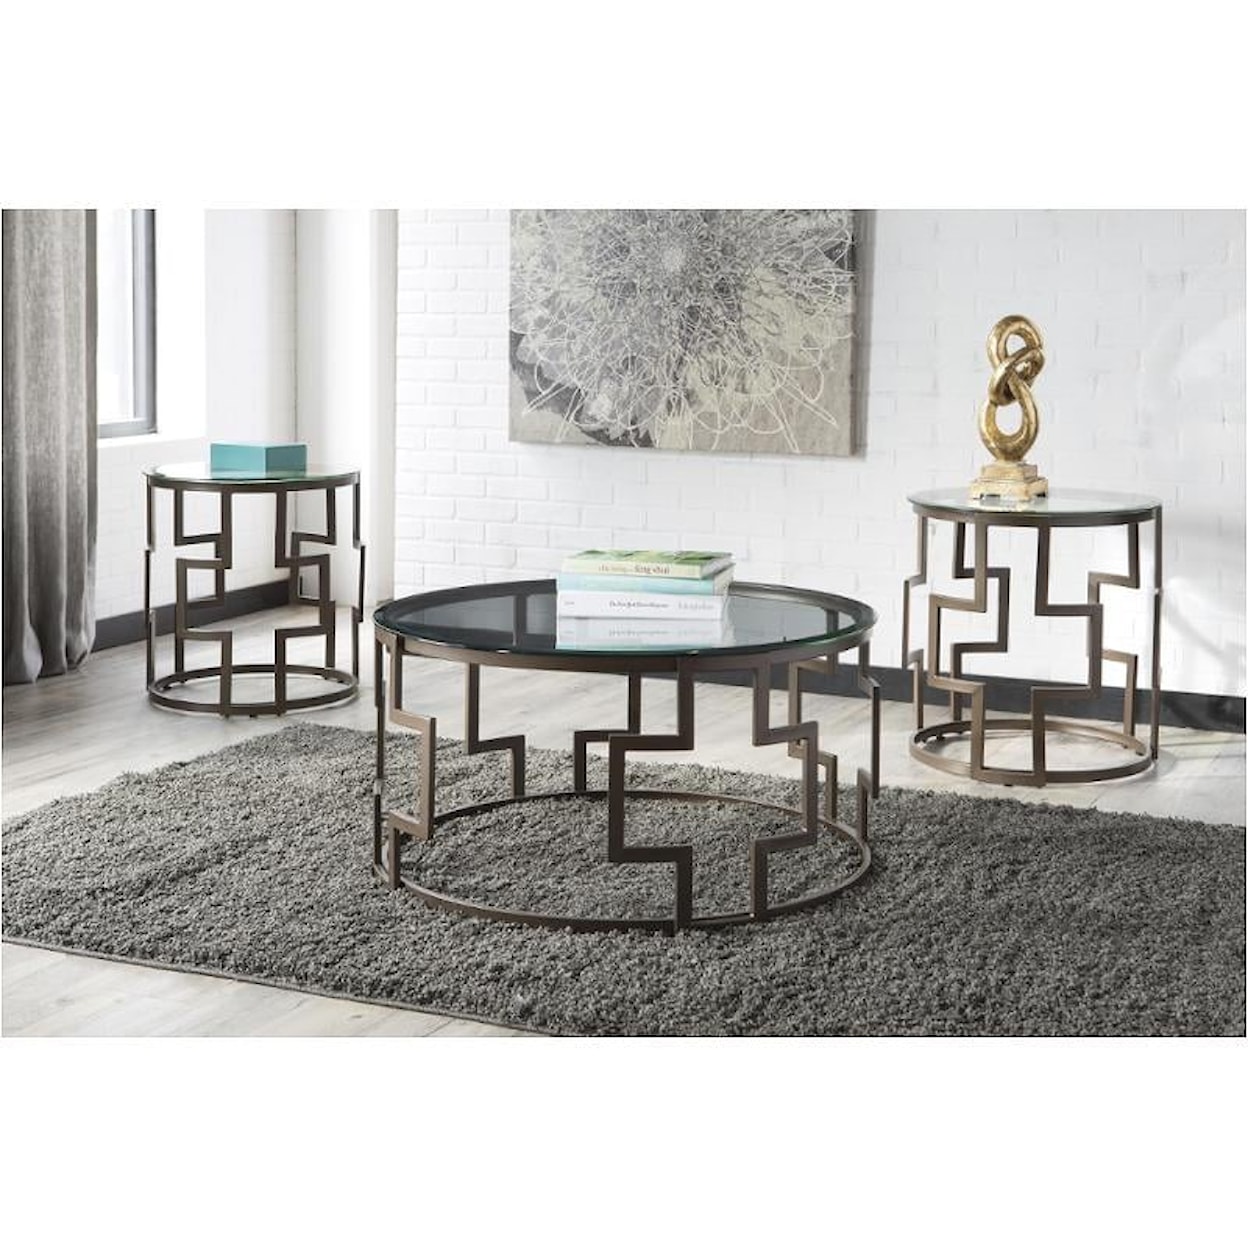 Signature Home Furnishings Frostine T138-13 T138-13 3PK Tables